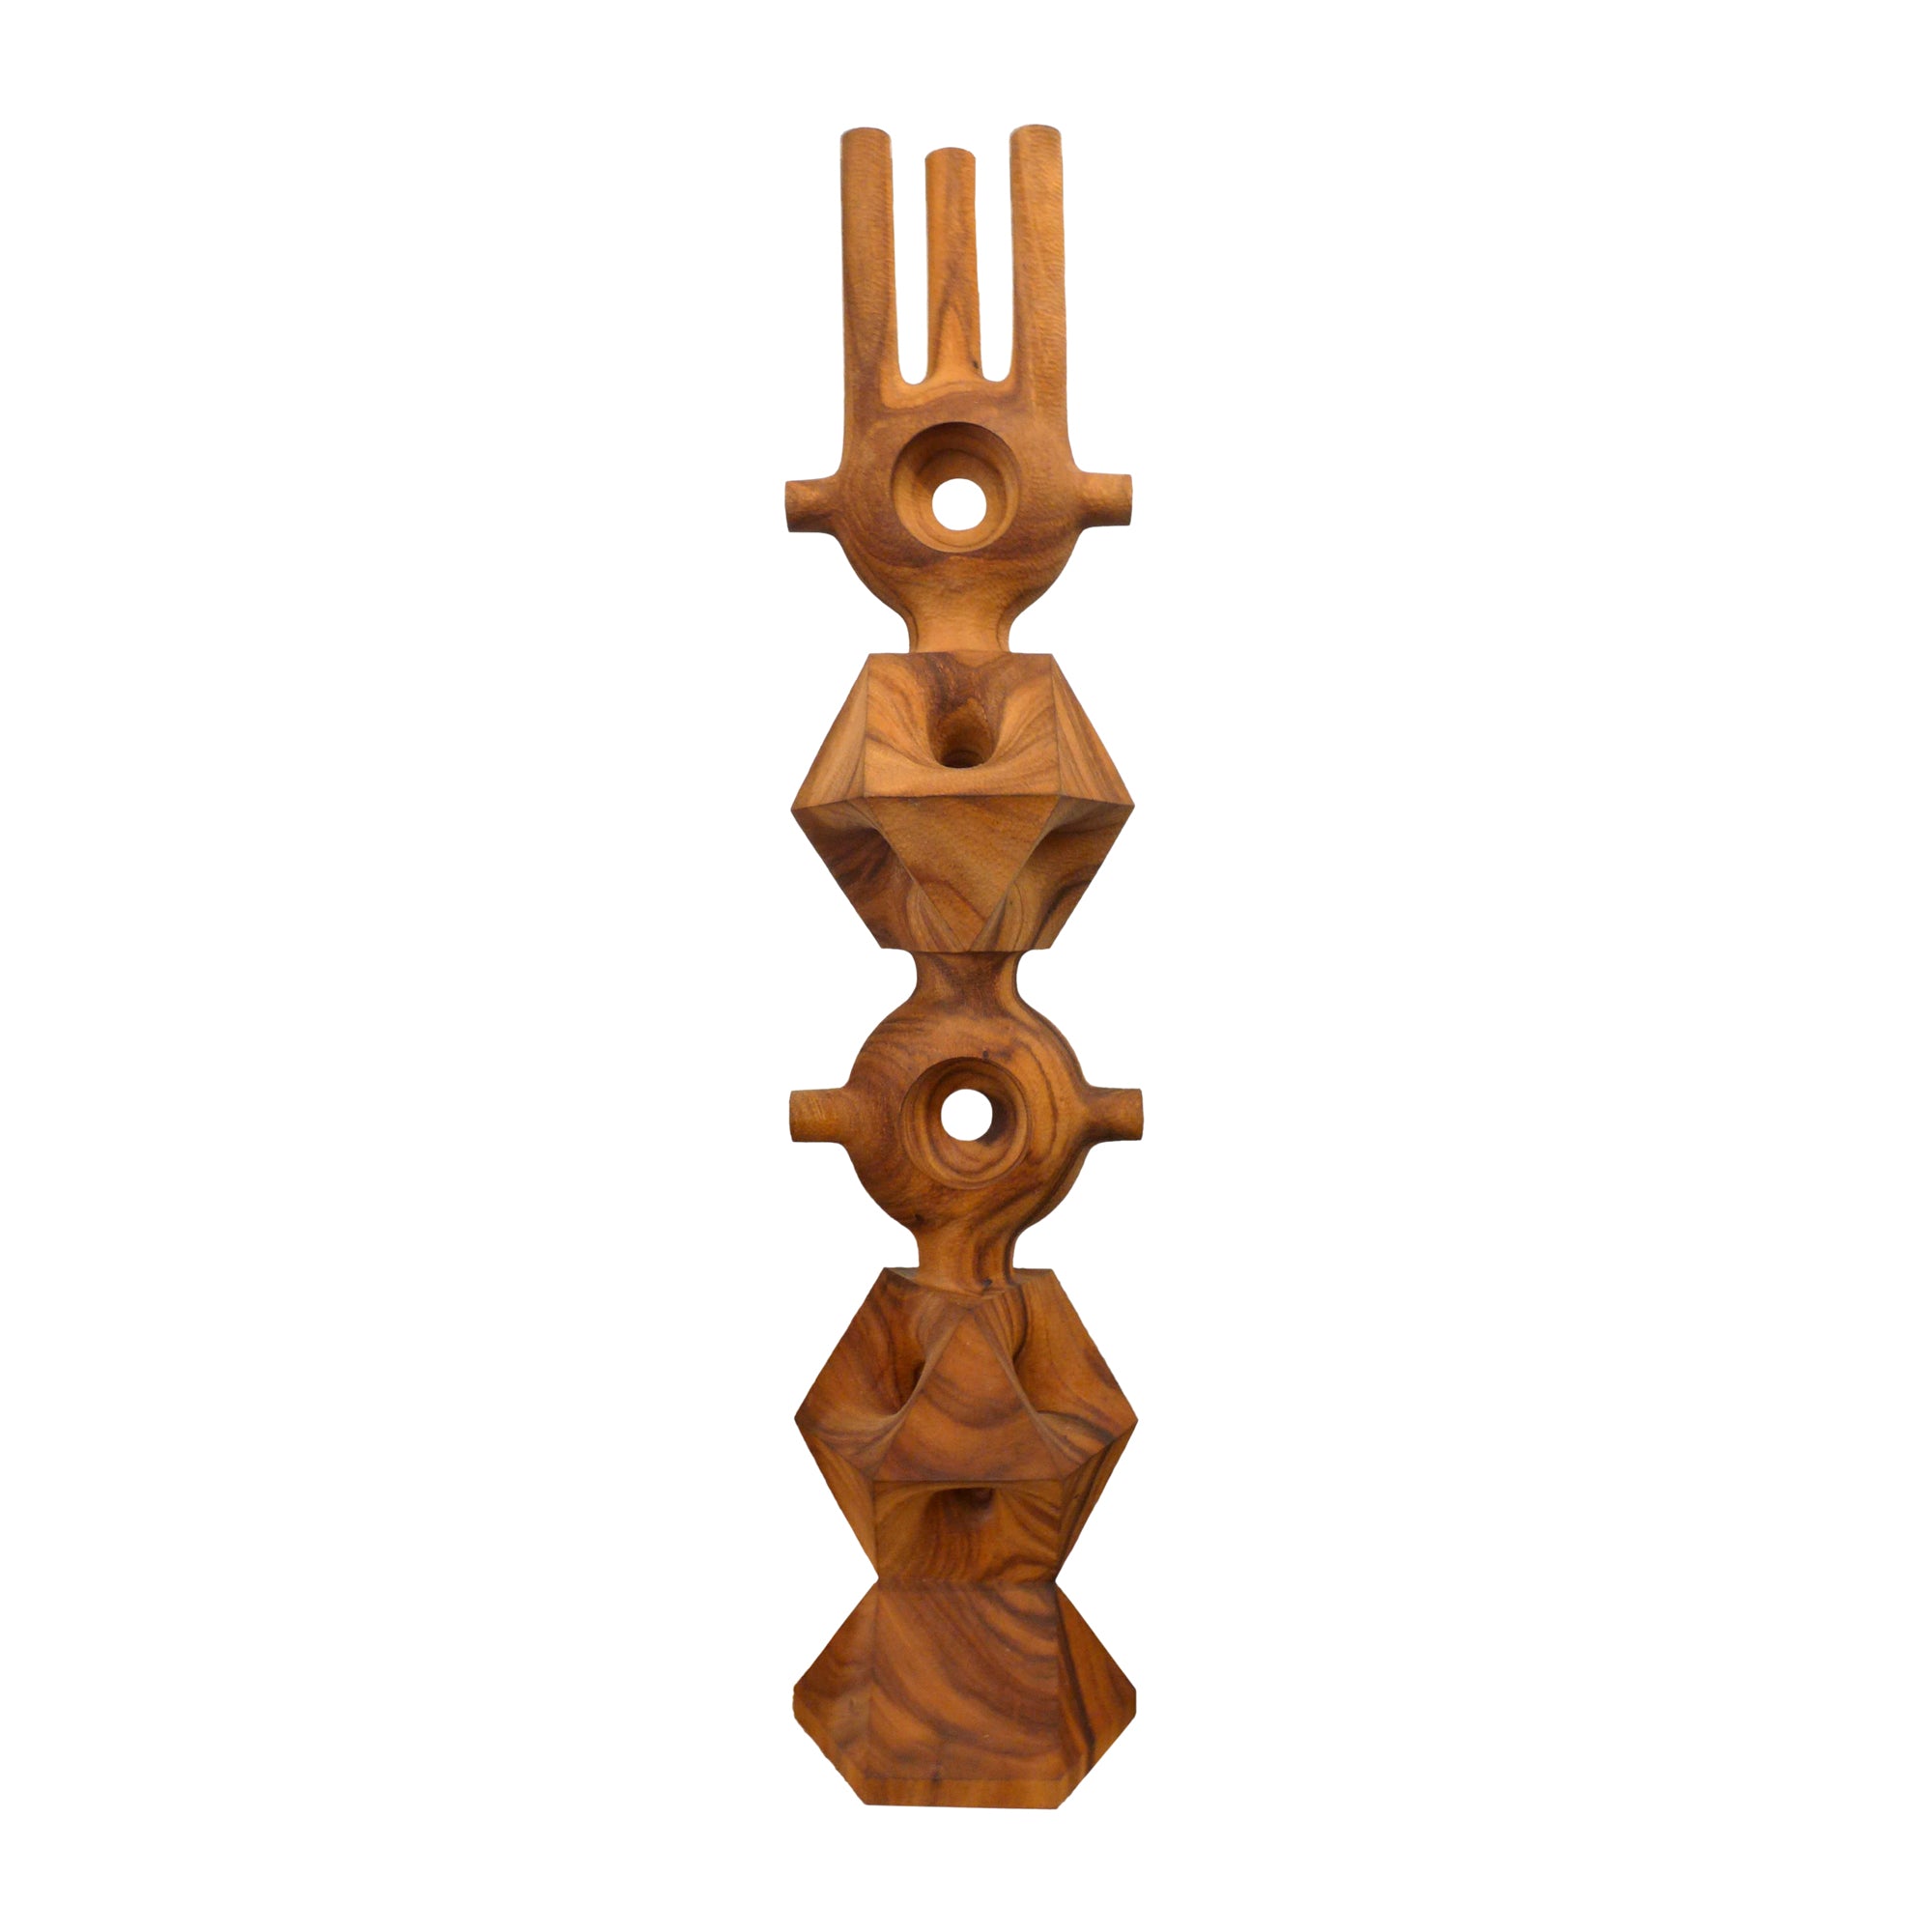 Contemporary Carved Wood "Hard/Soft" Totem Sculpture by Aleph Geddis